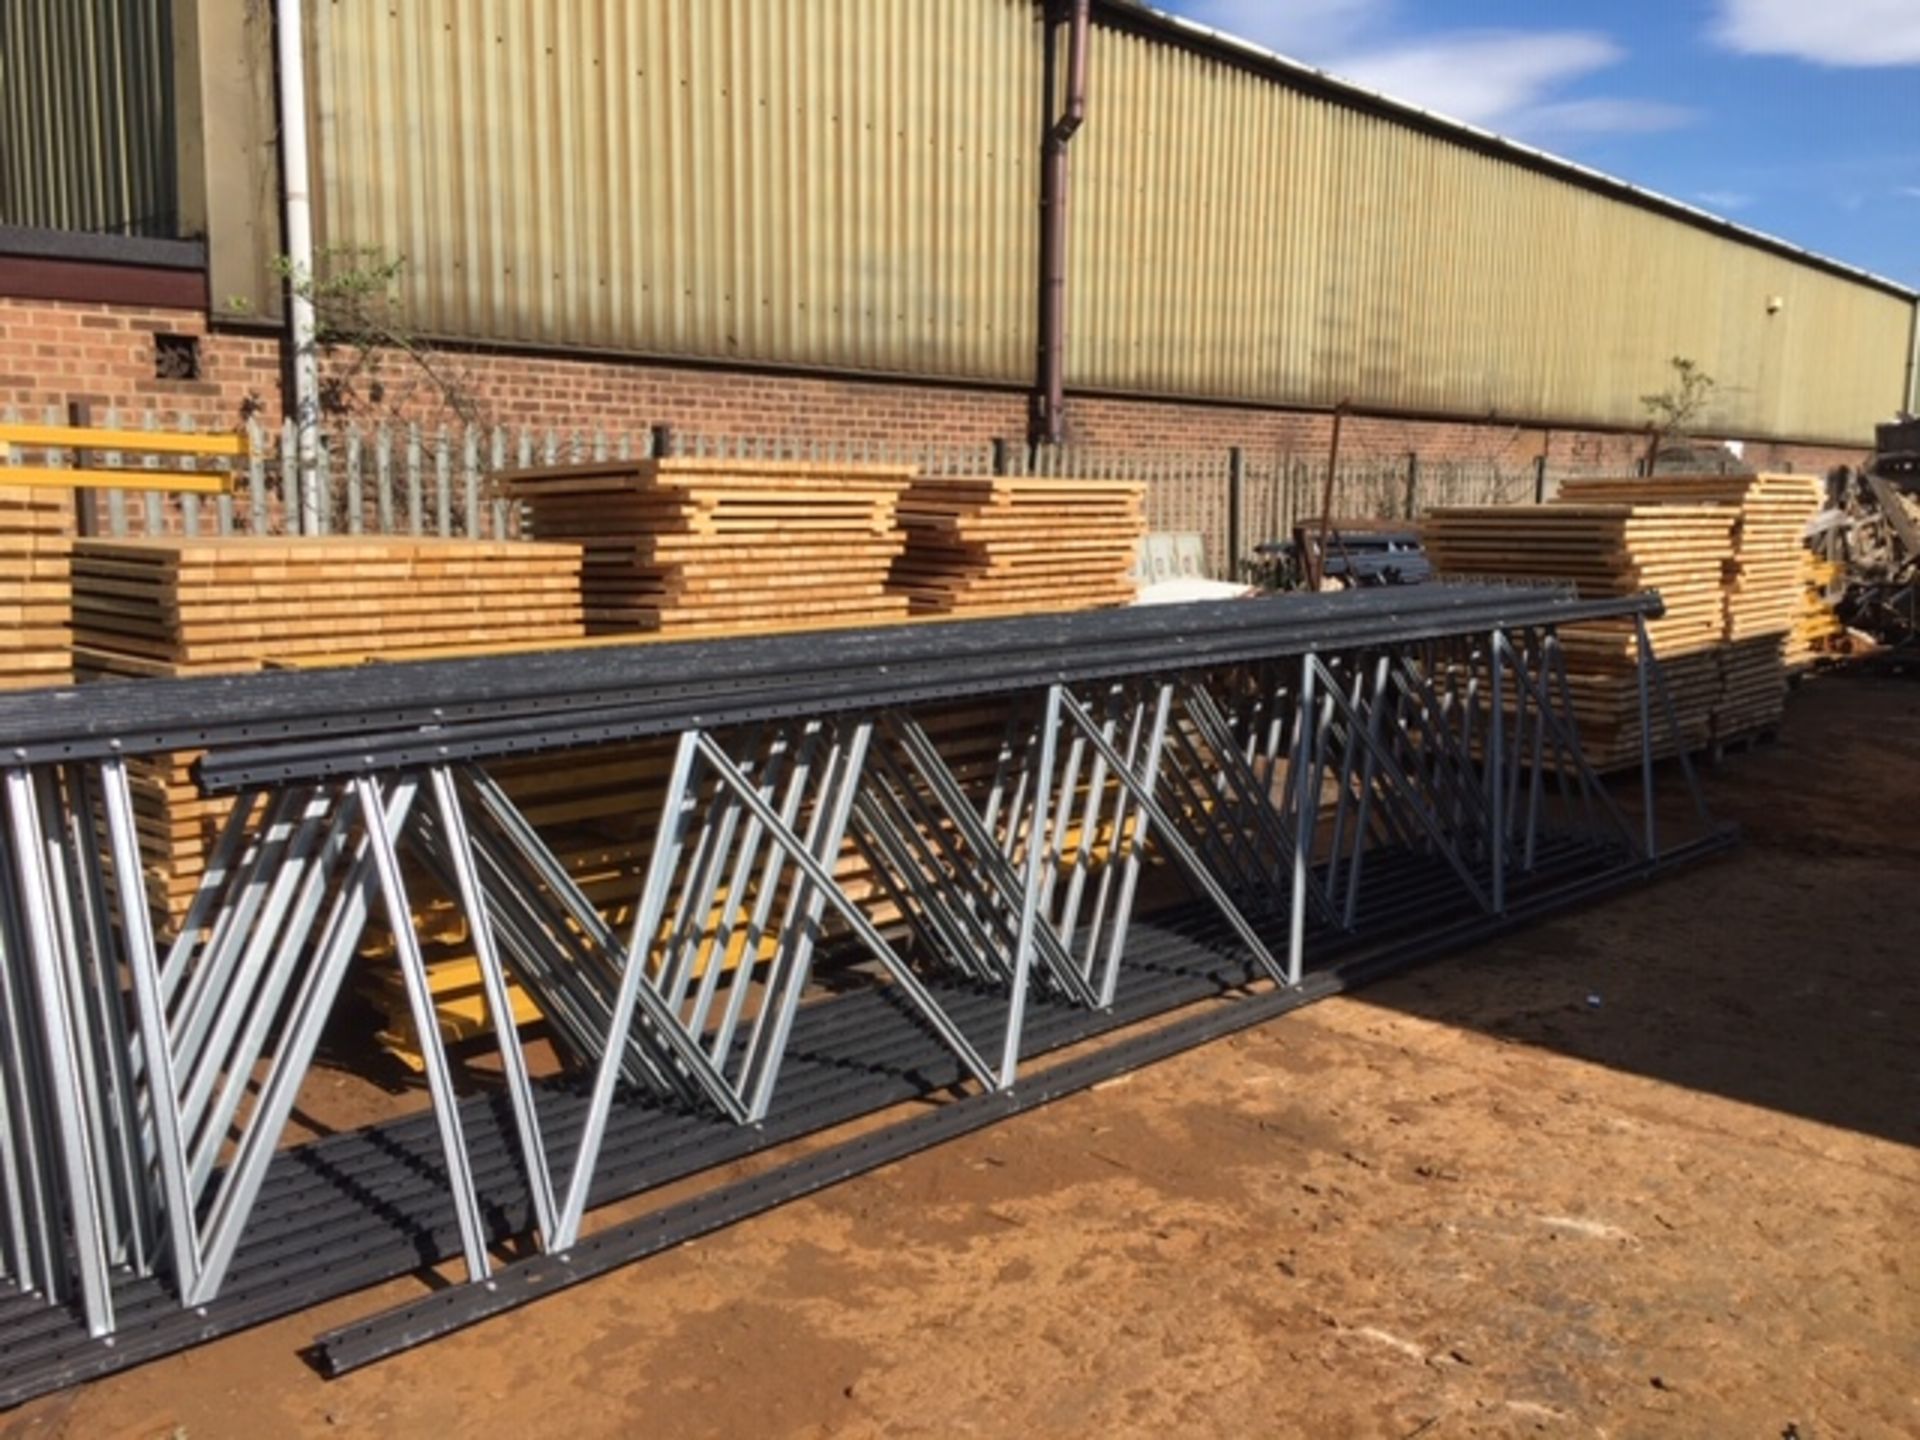 Pallet Racking cw Wooden Slatted Bases - Image 9 of 11